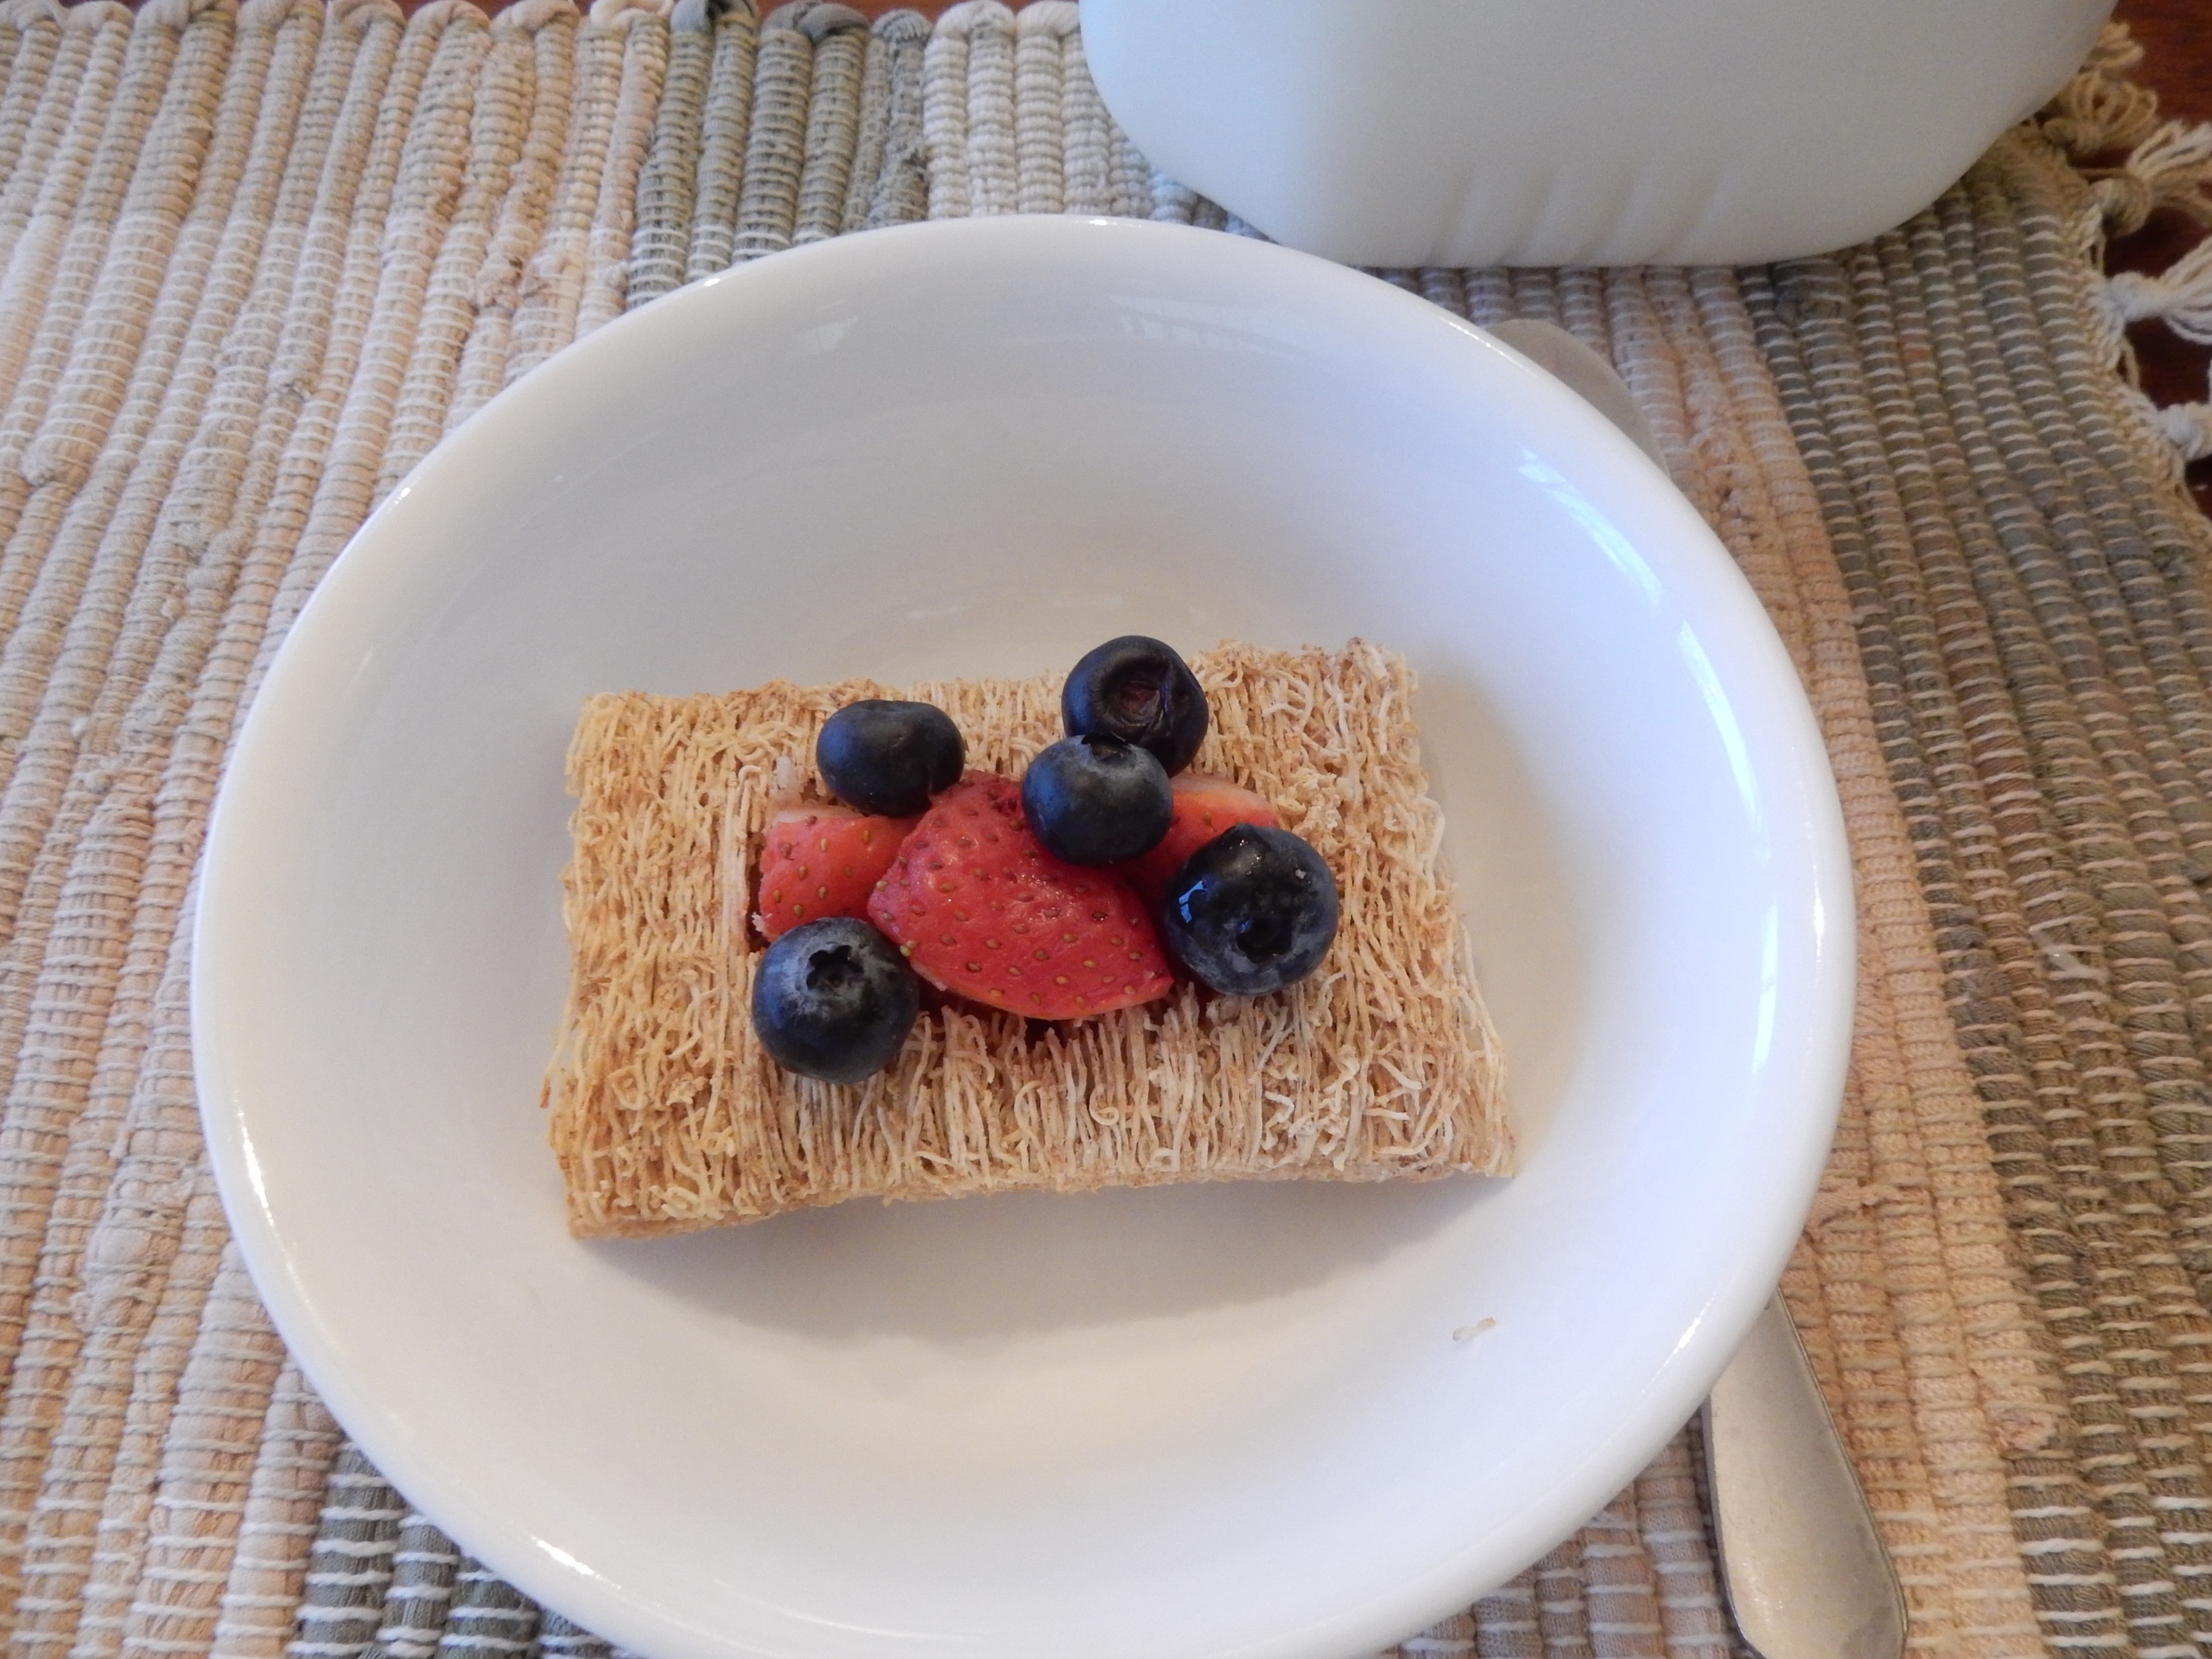 Shredded Wheat Biscuit with Strawberries and Blueberries